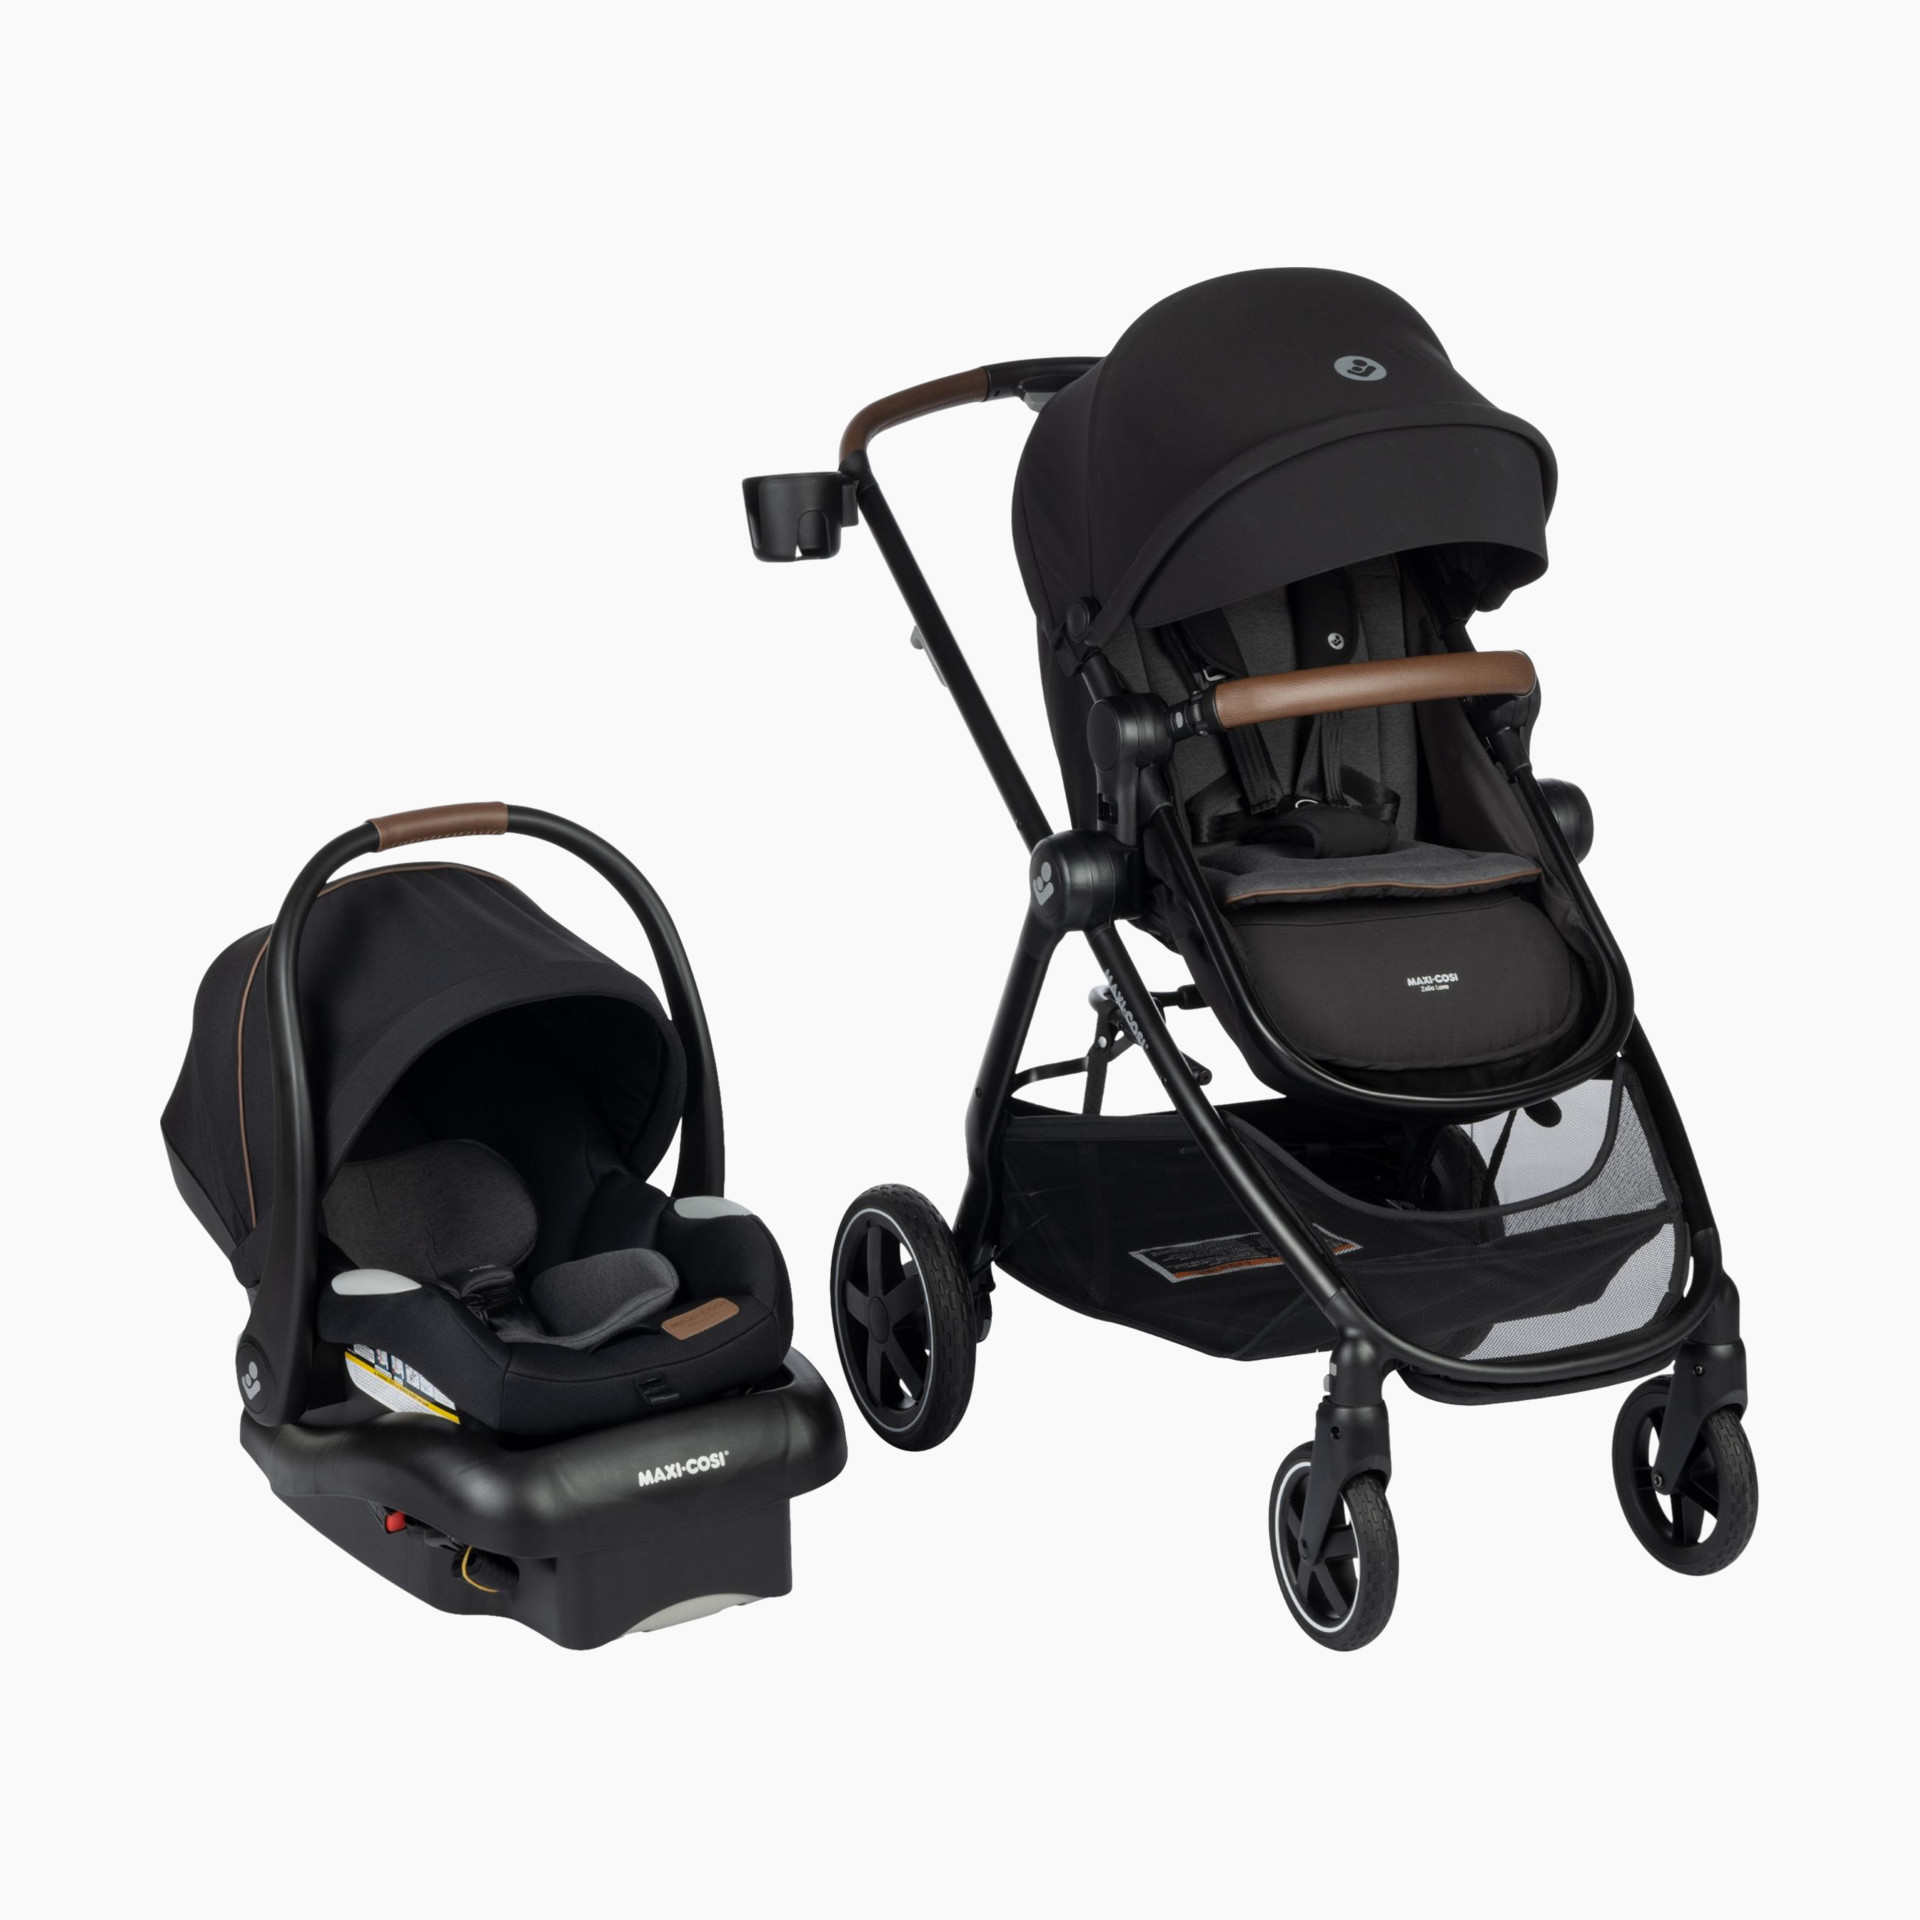 Baby Boy Combo Travel System Set Stroller With Car Seat Playard Diaper Bag  Swing